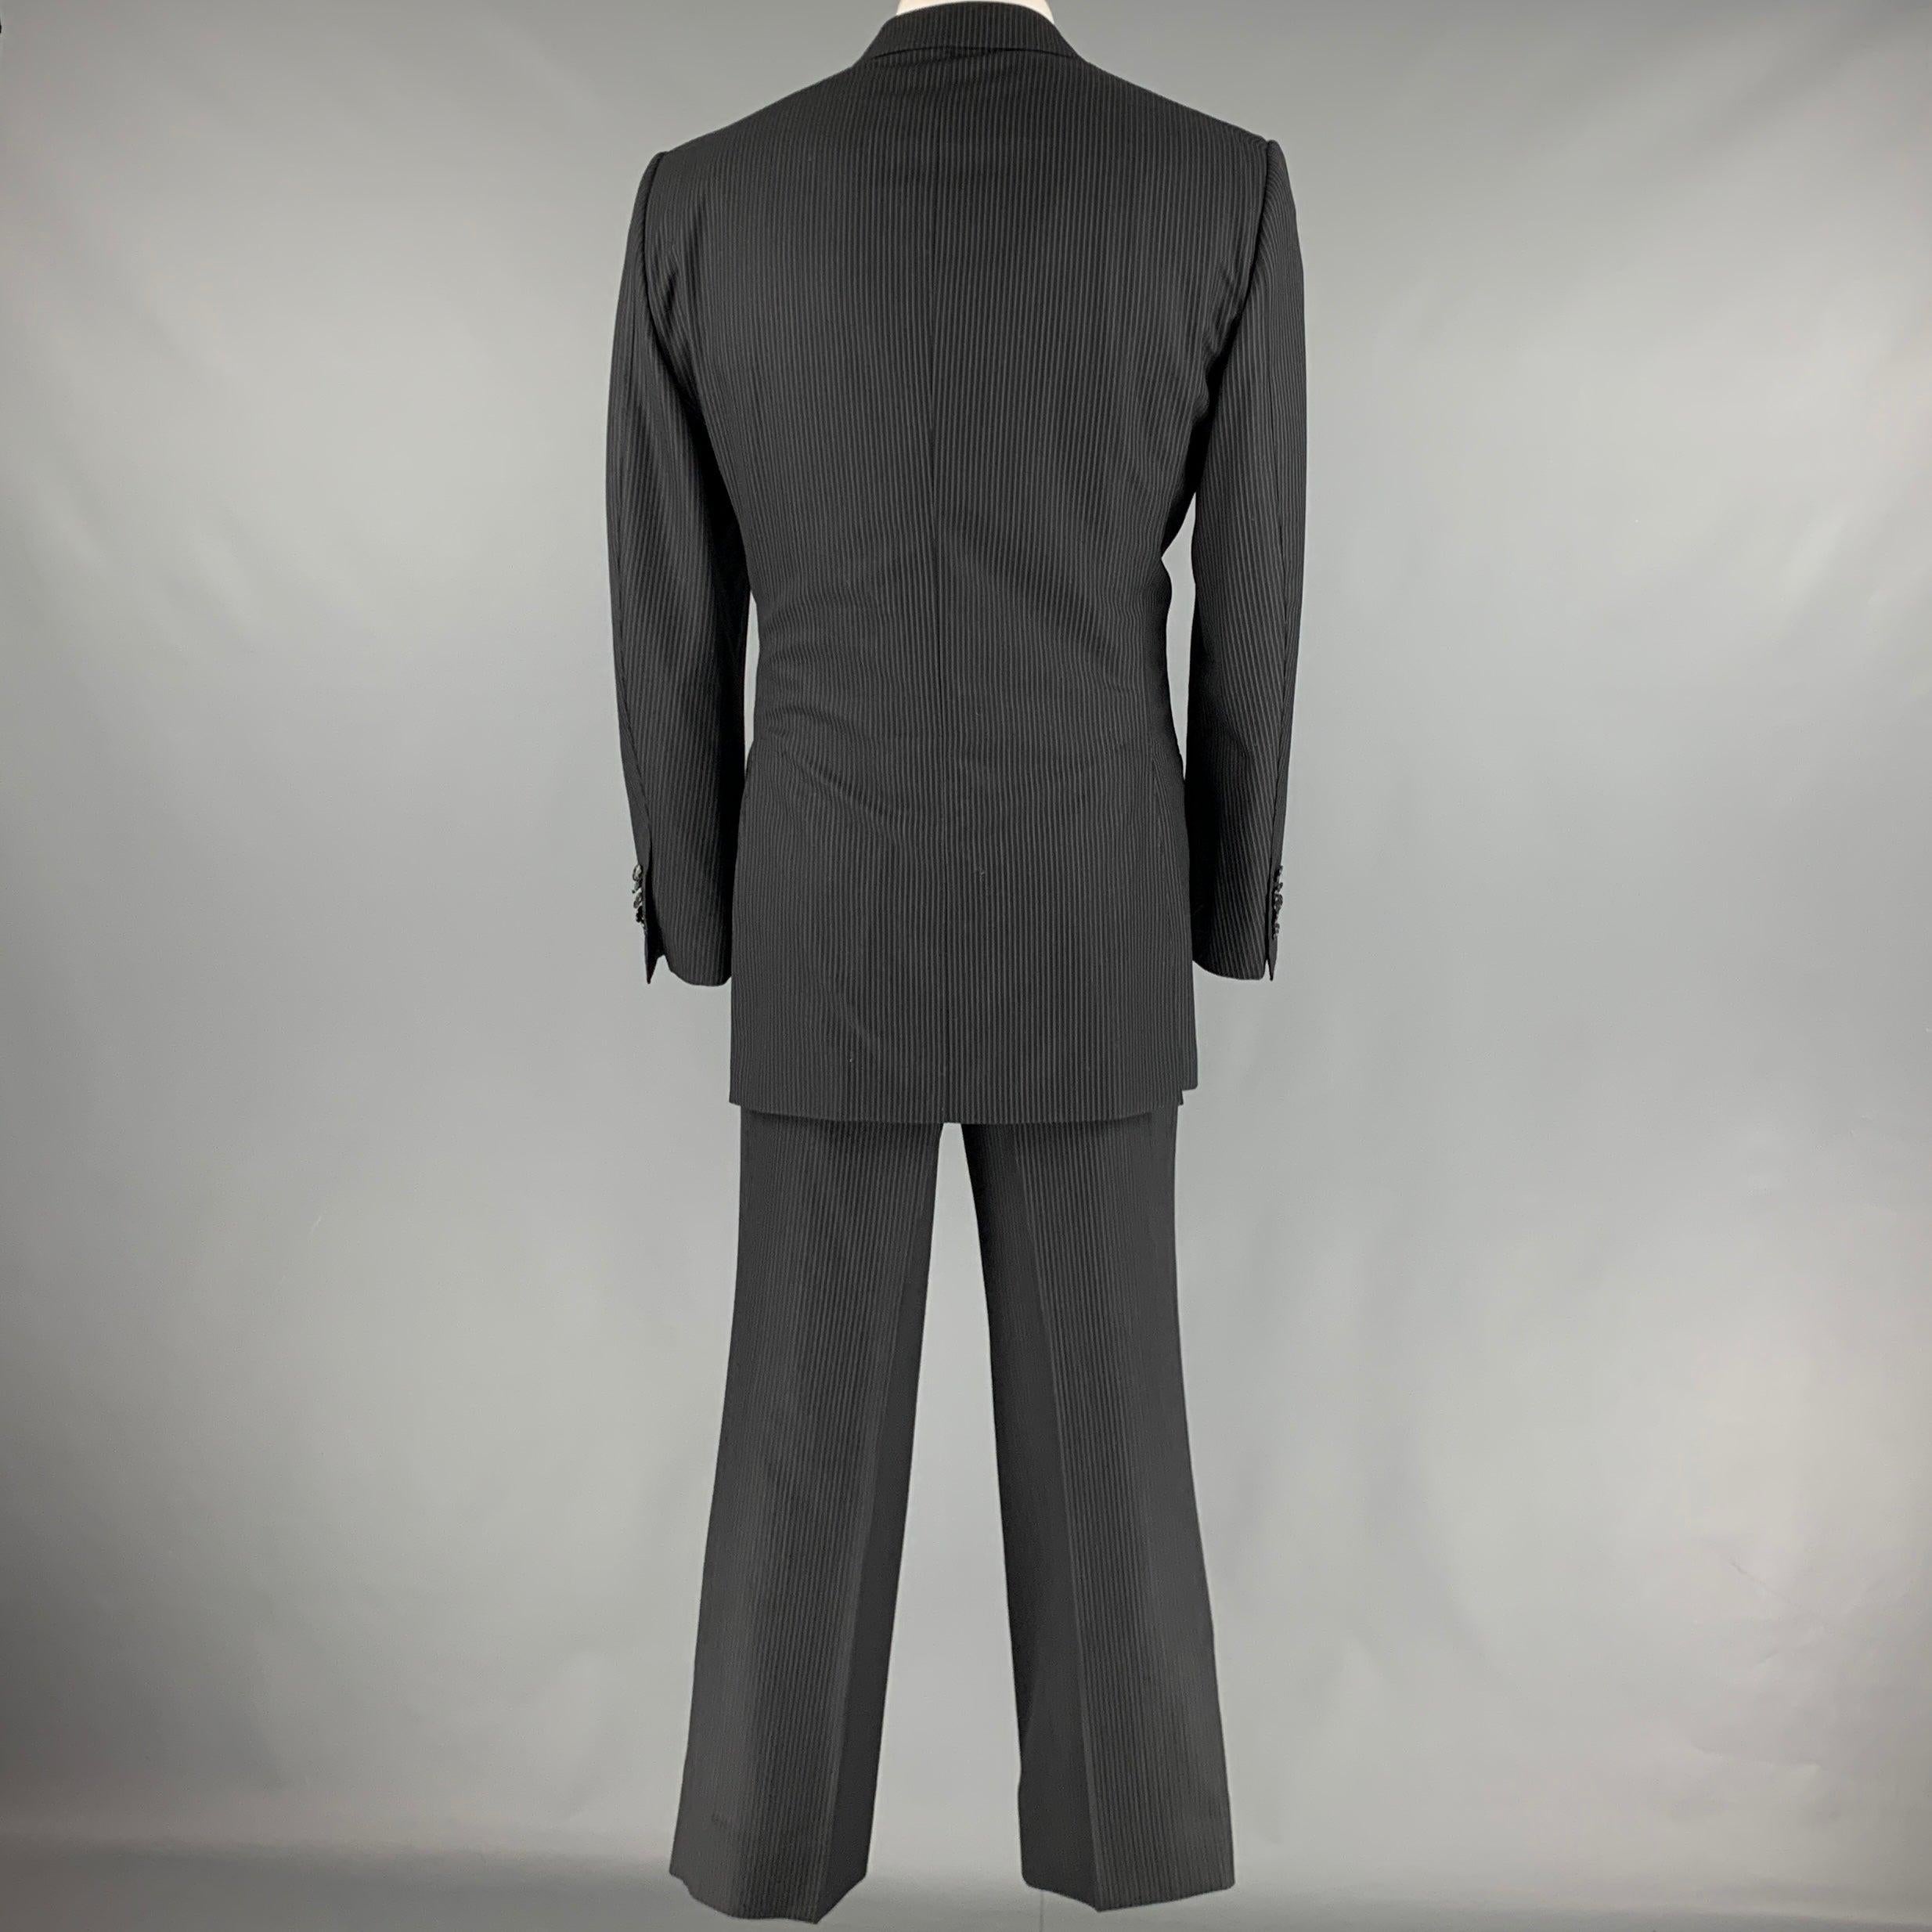 TOM FORD Size 48 Long Black Grey Pinstripe Wool Peak Lapel Suit In Good Condition For Sale In San Francisco, CA